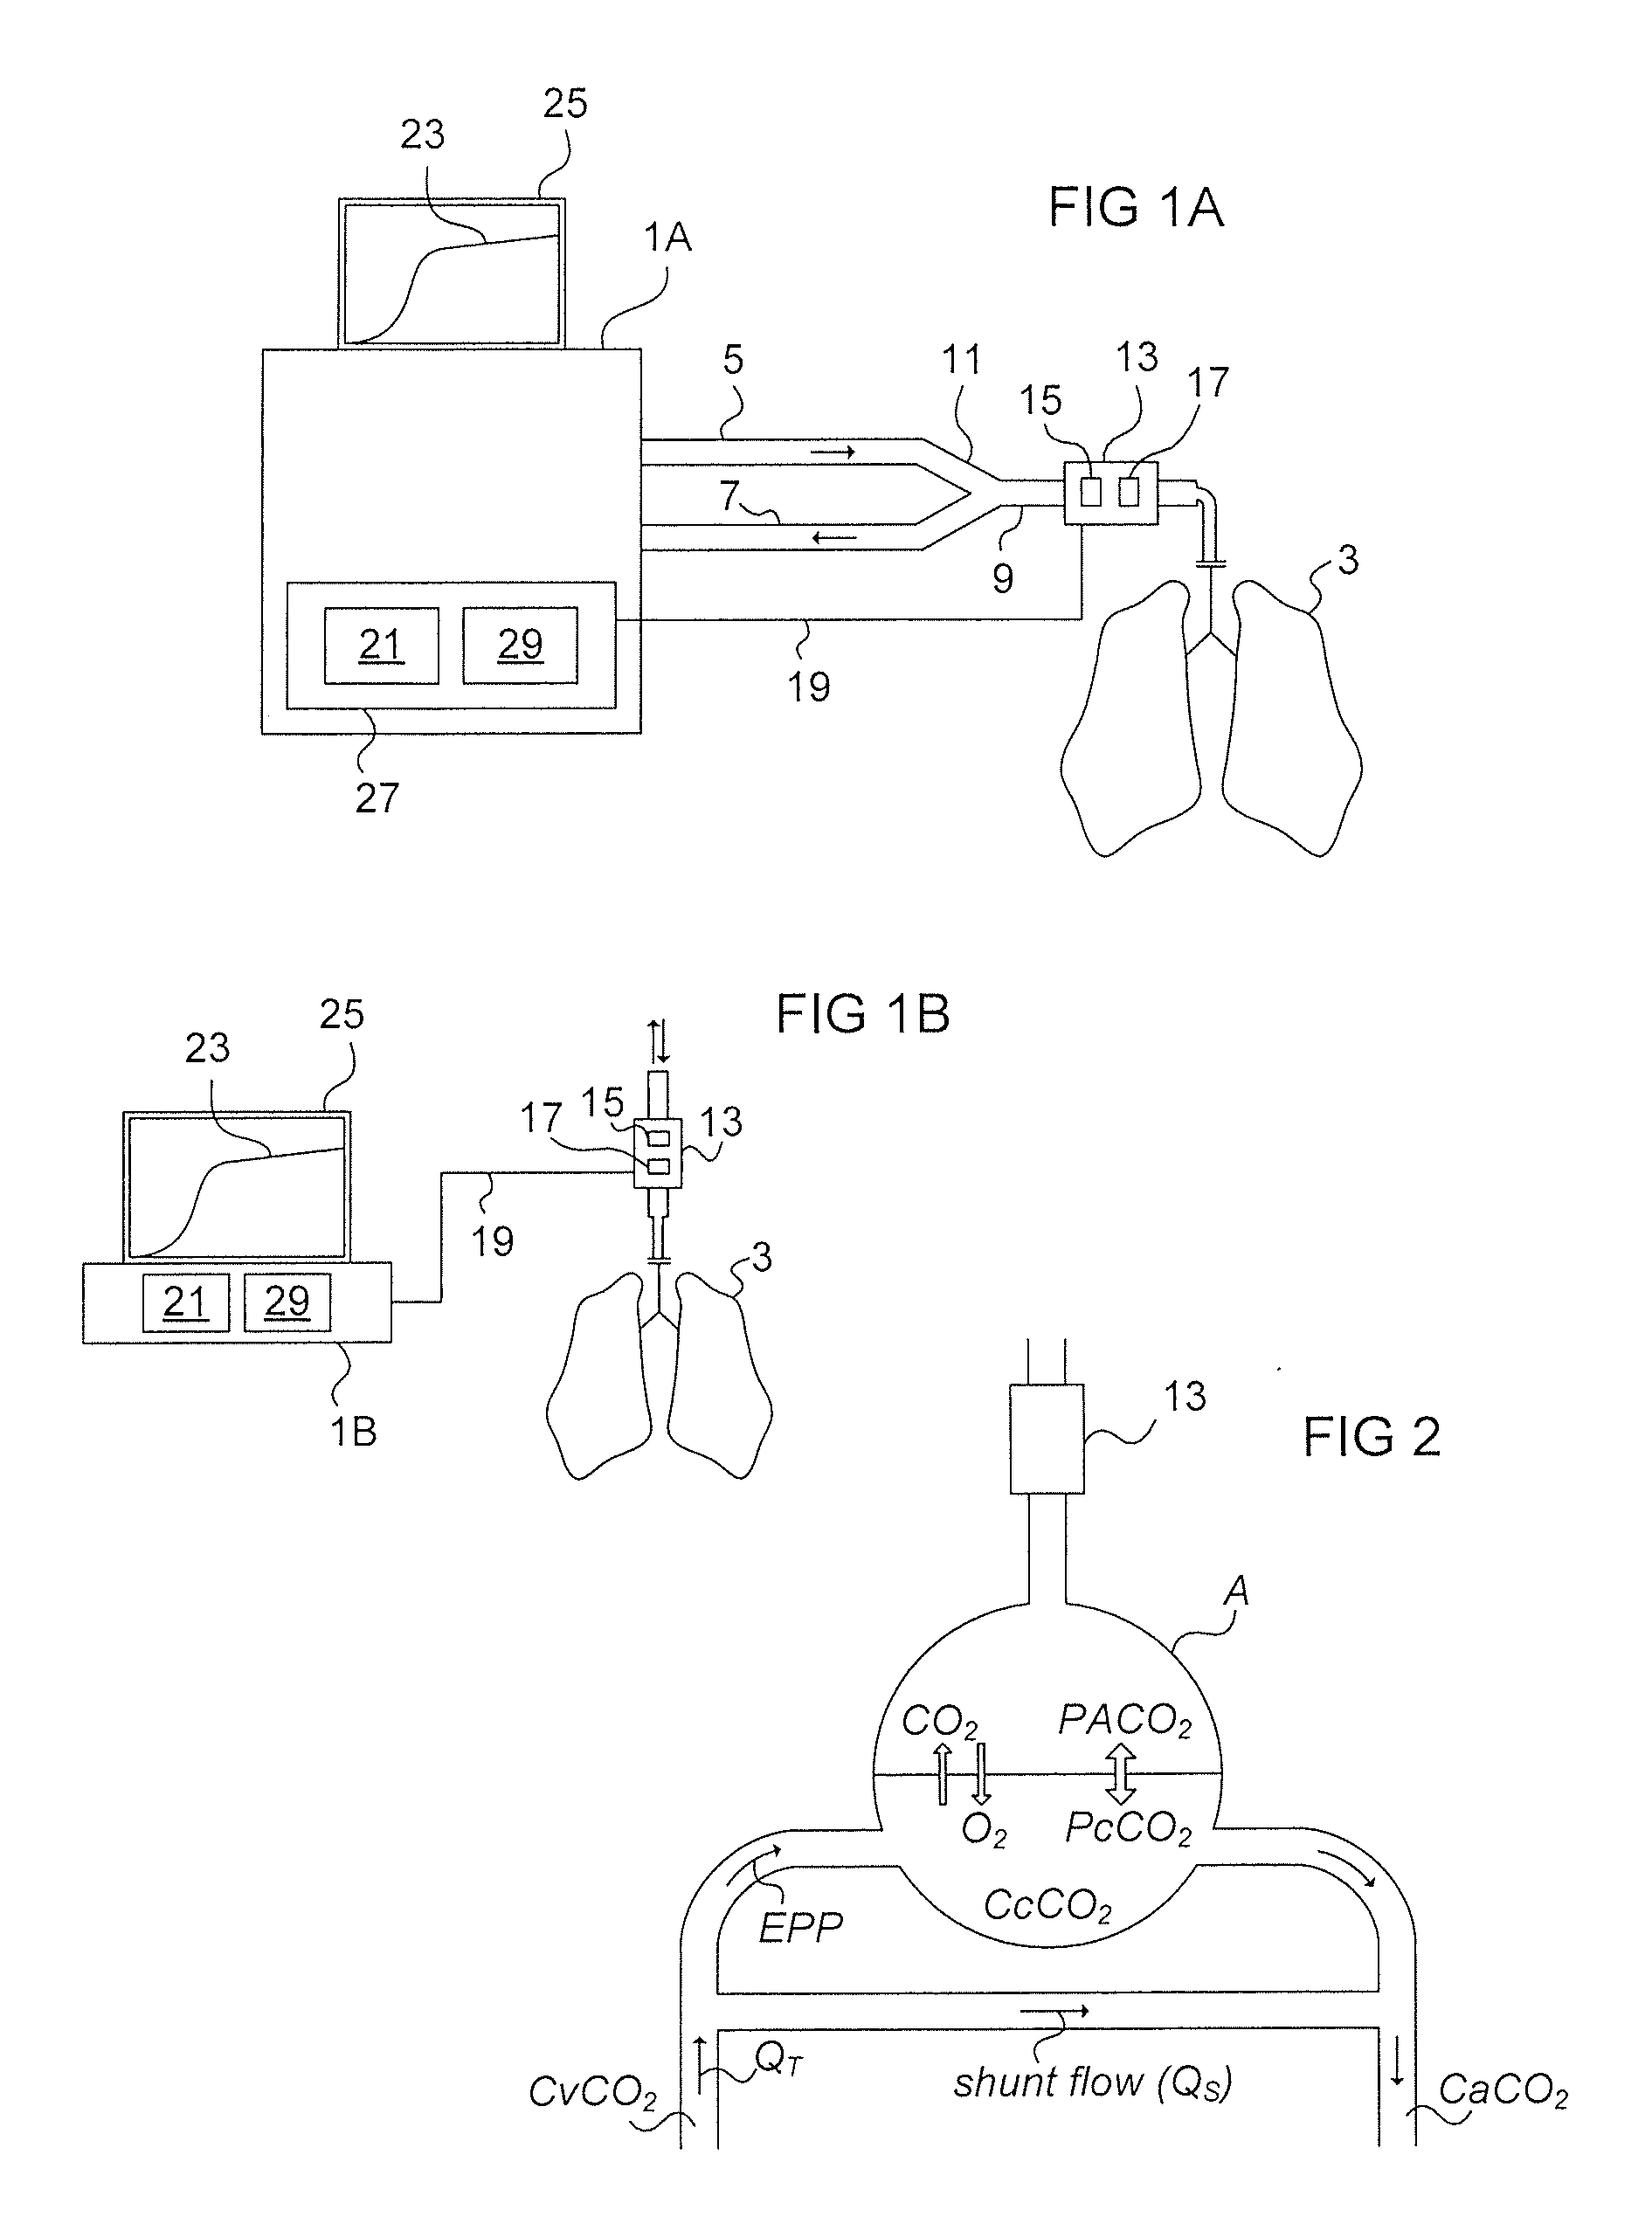 Method and apparatus for estimating shunt